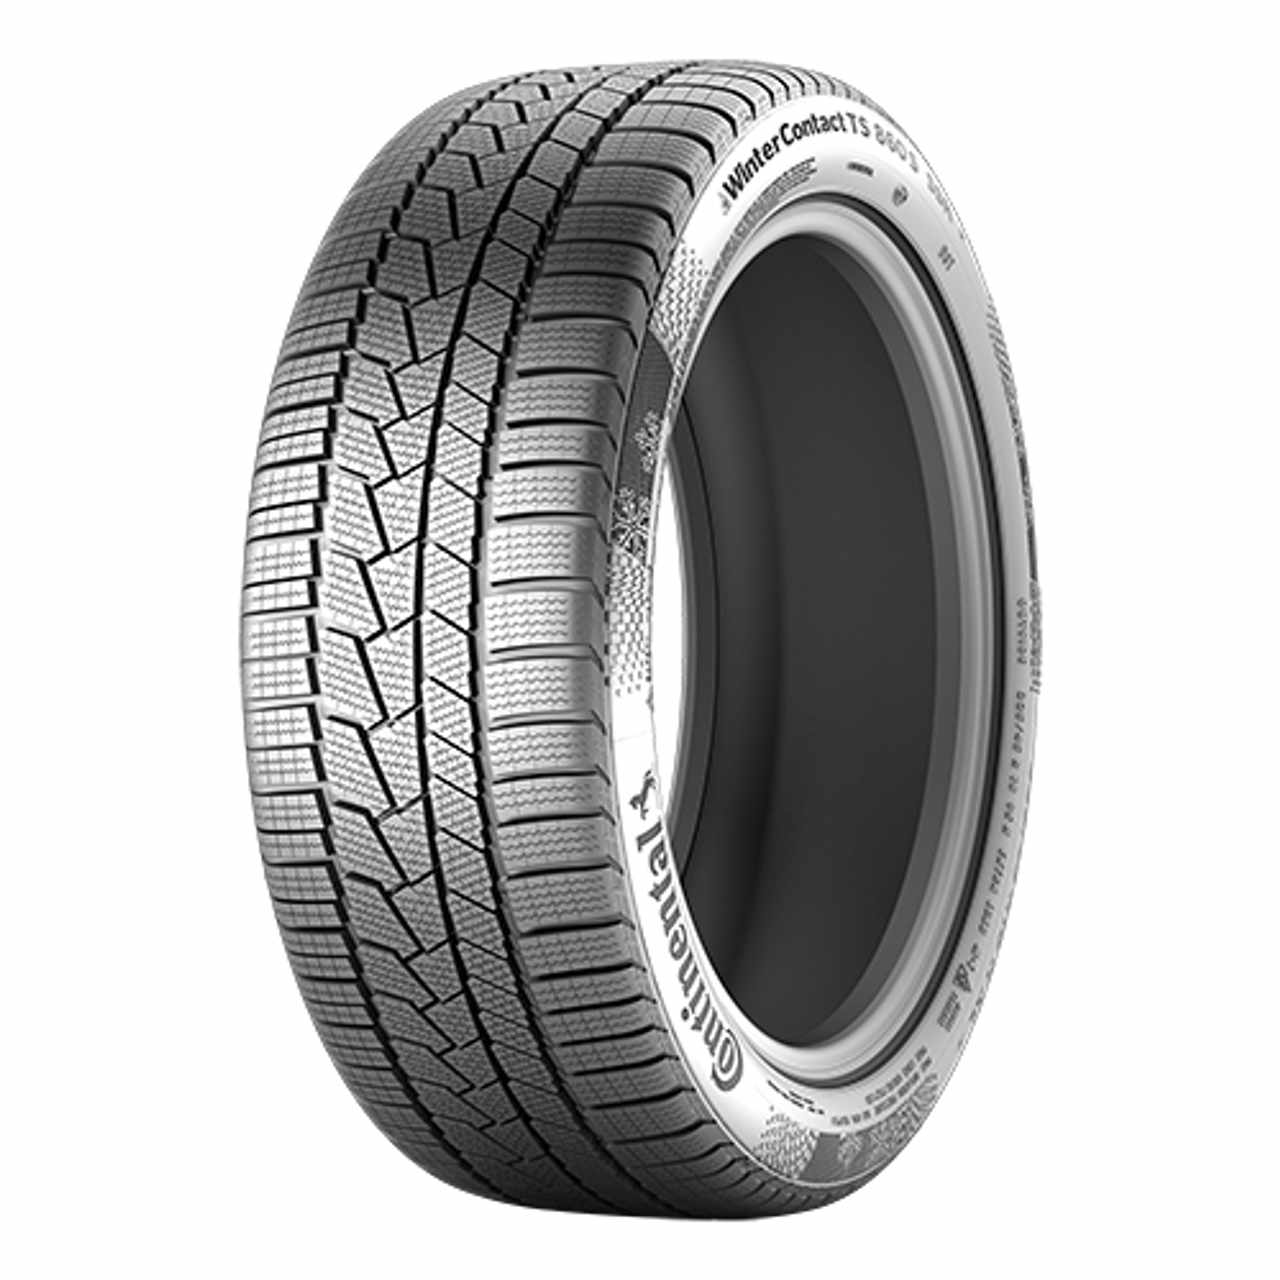 CONTINENTAL WINTERCONTACT TS 860 S (EVc) 255/35R19 96V FR BSW